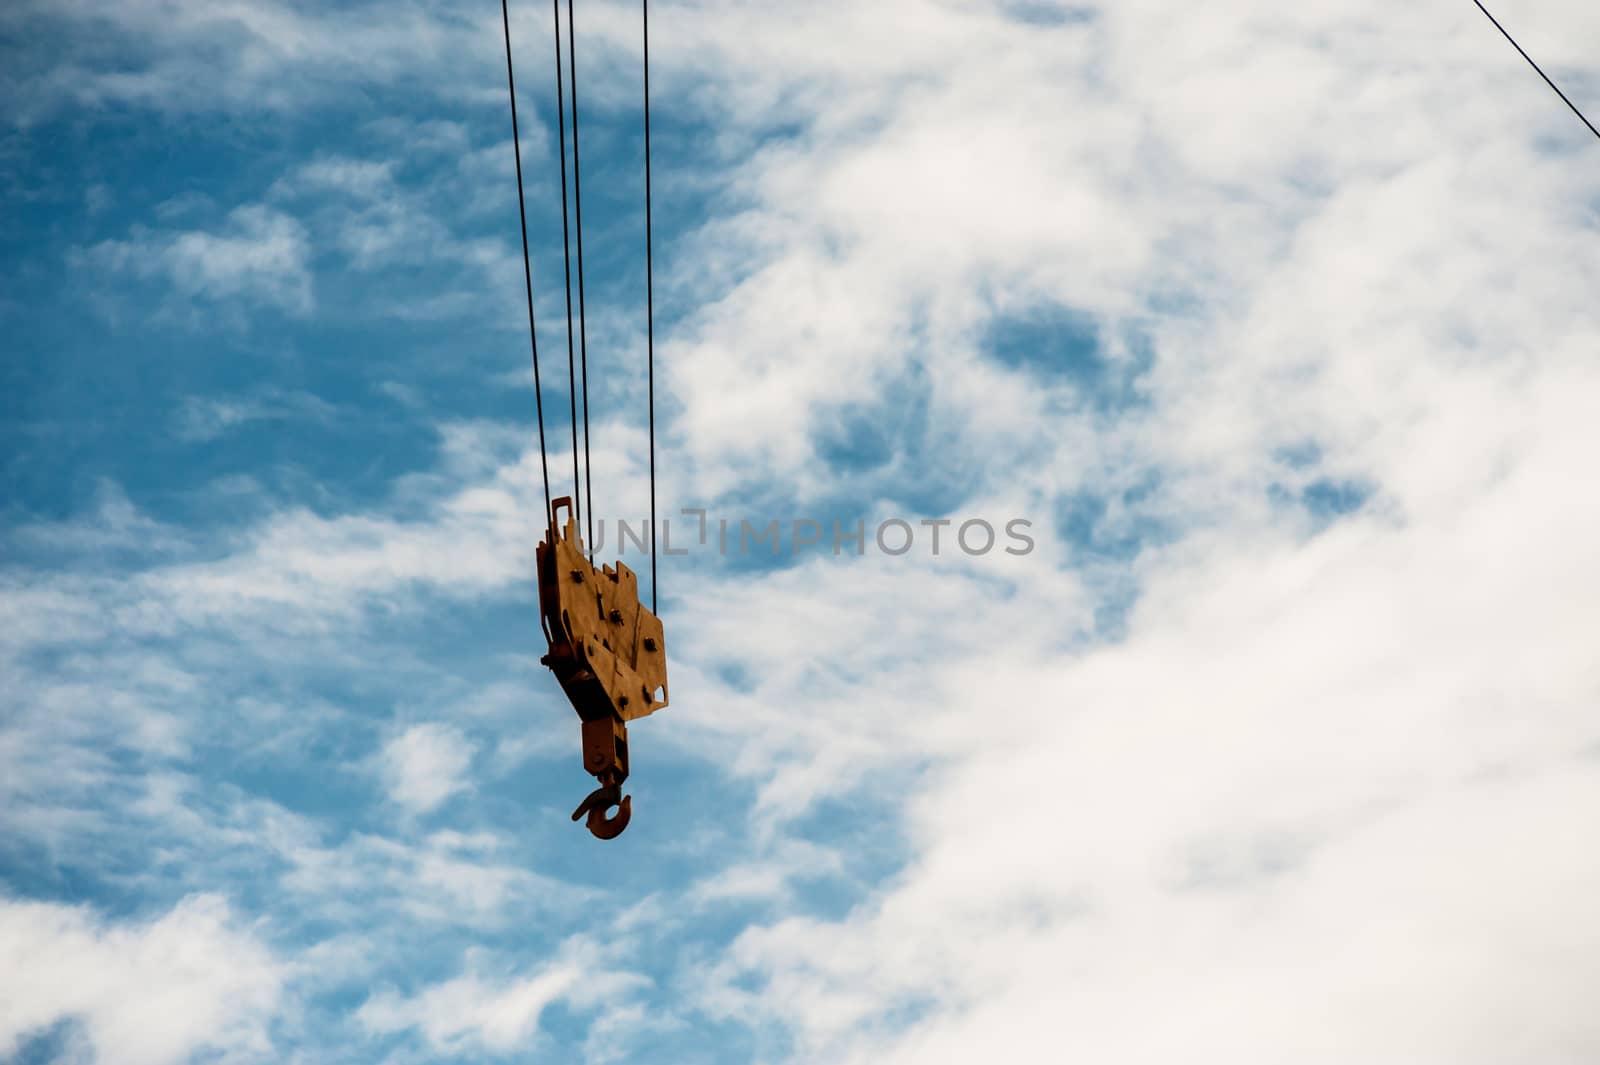 Crane in construction with blue sky by panumazz@gmail.com